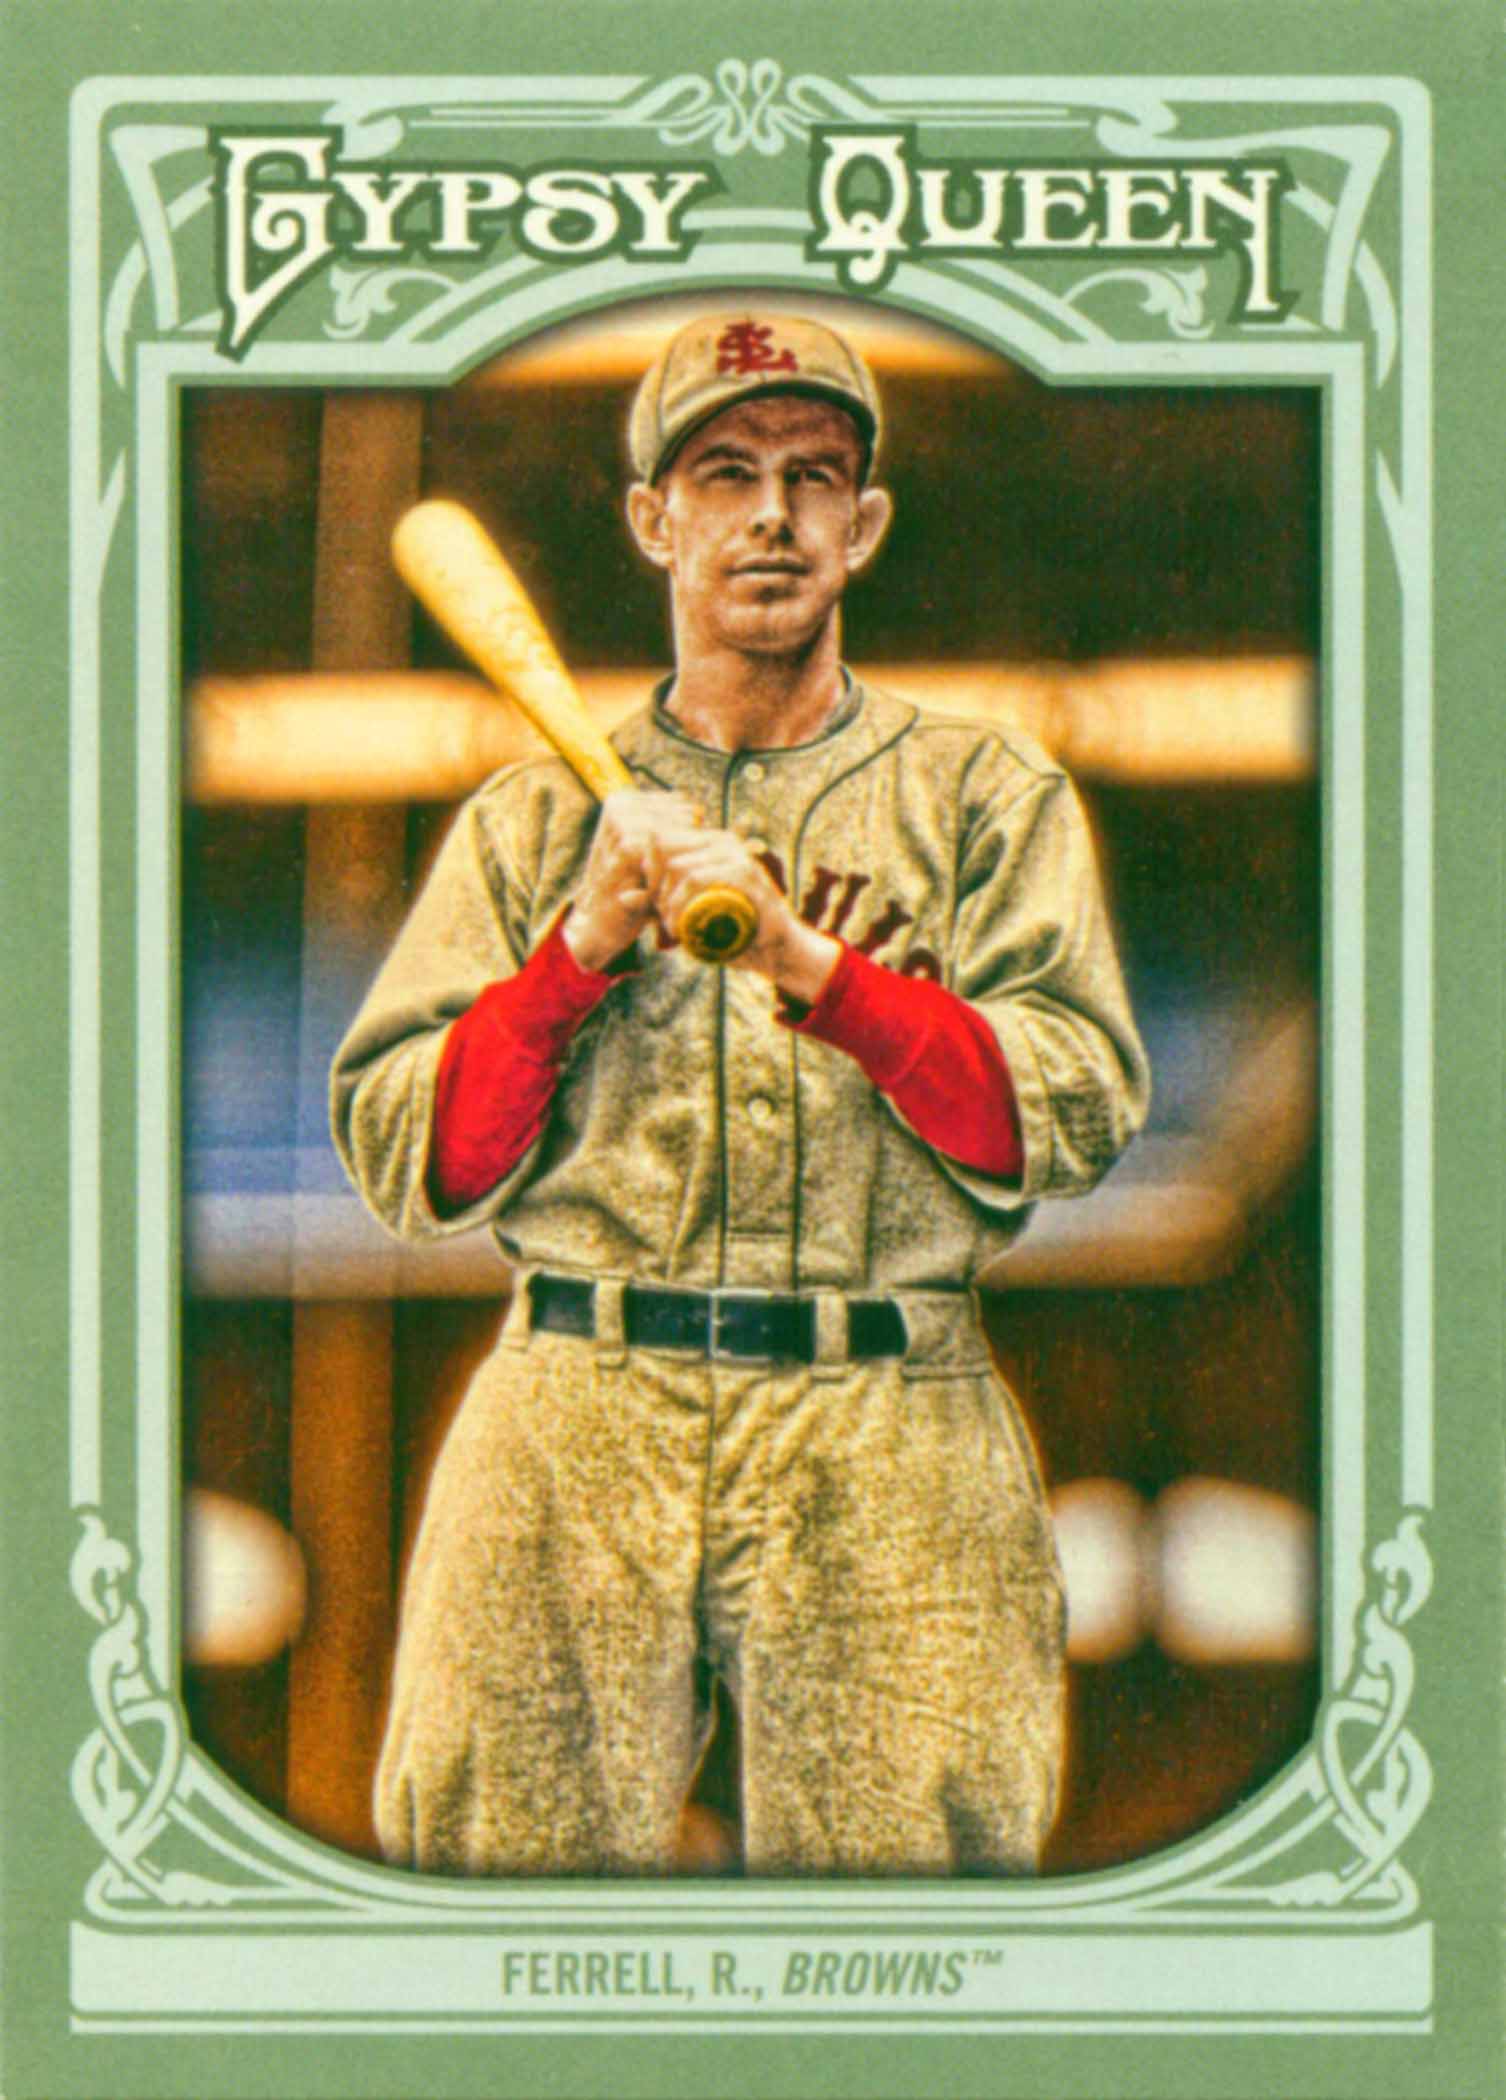 2013 Topps Gypsy Queen